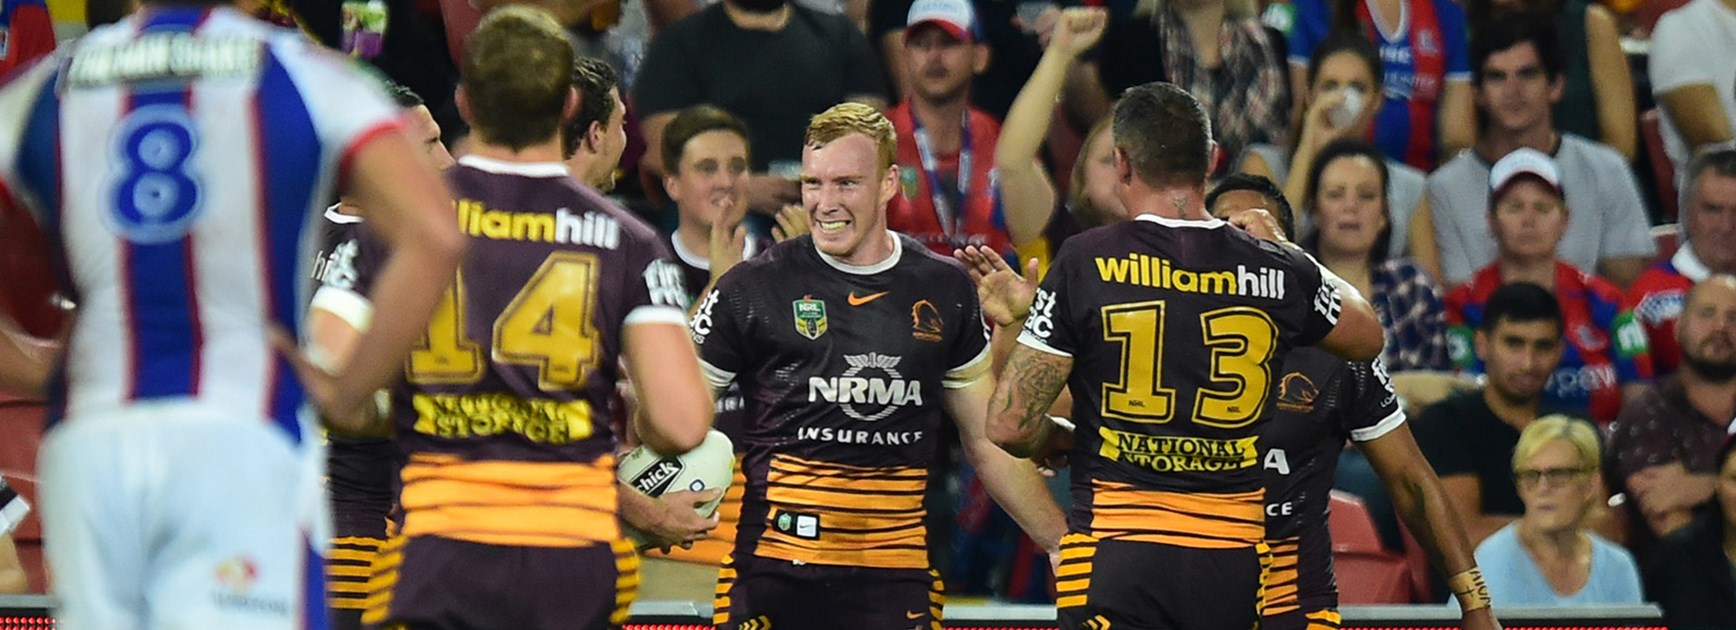 The Broncos celebrate a try against the Knights at Suncorp Stadium.